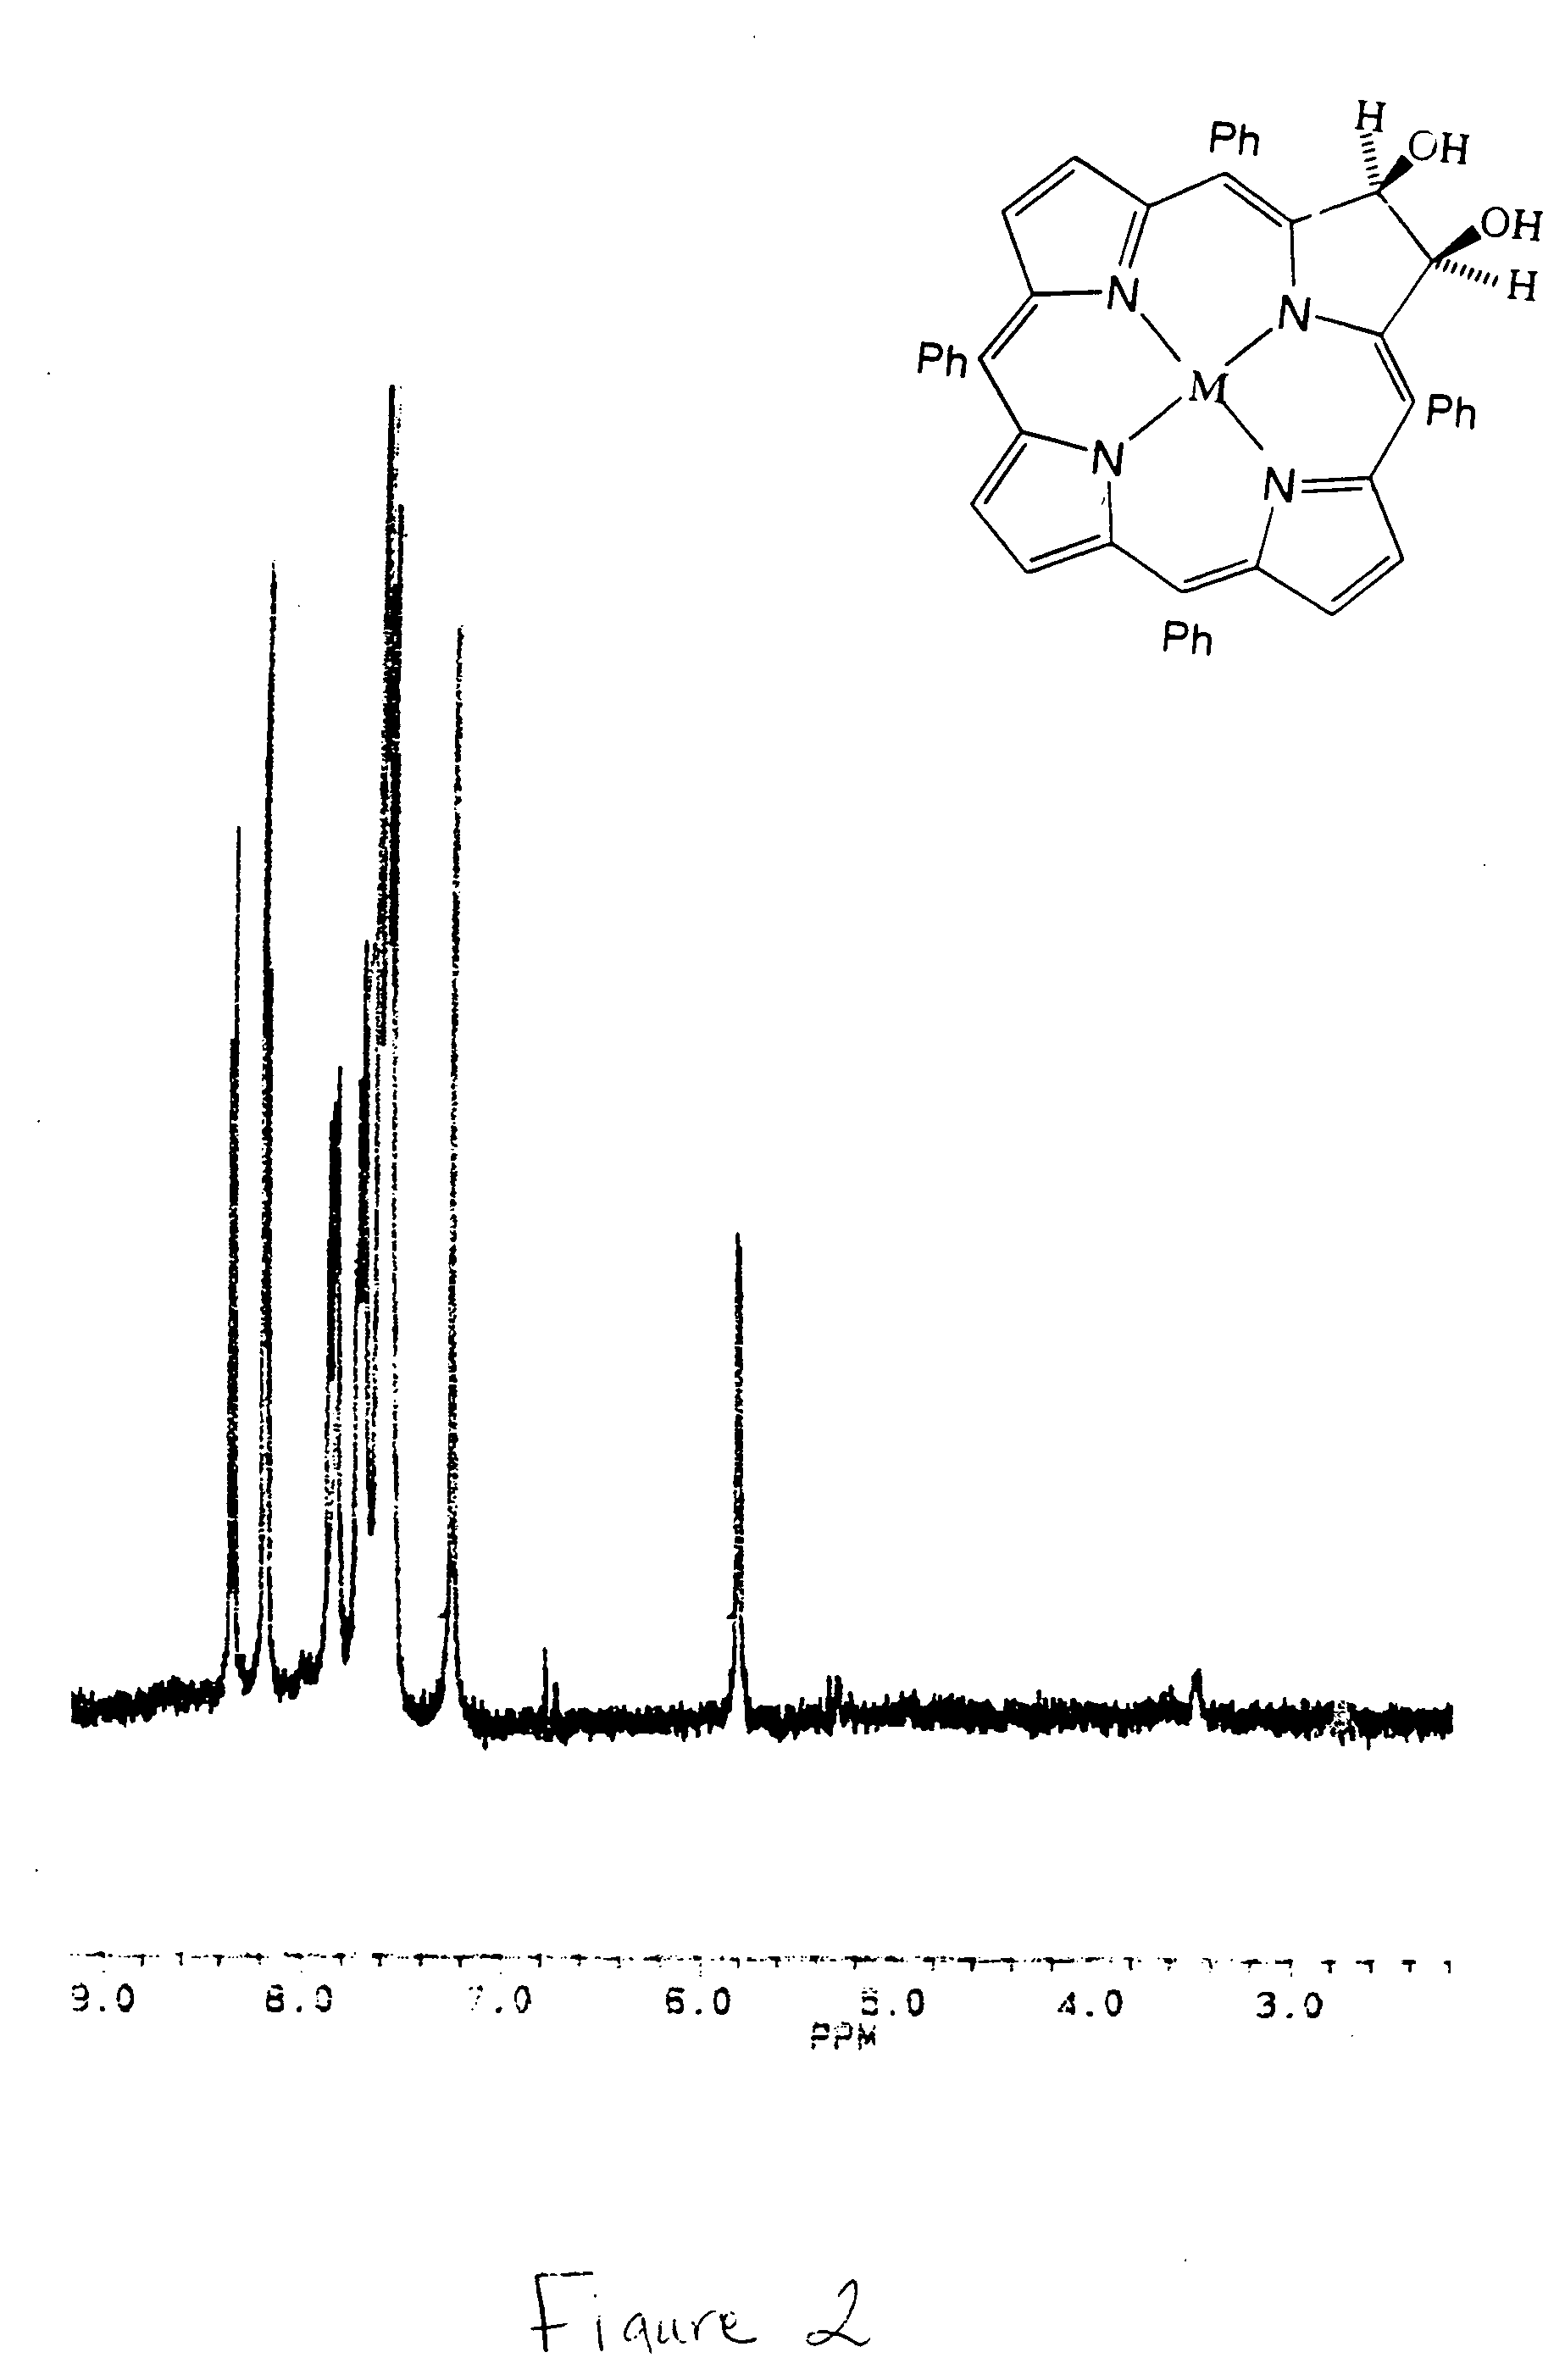 Beta,beta'-dihydroxy meso-substituted chlorins, isobacteriochlorins, and bacteriochlorins